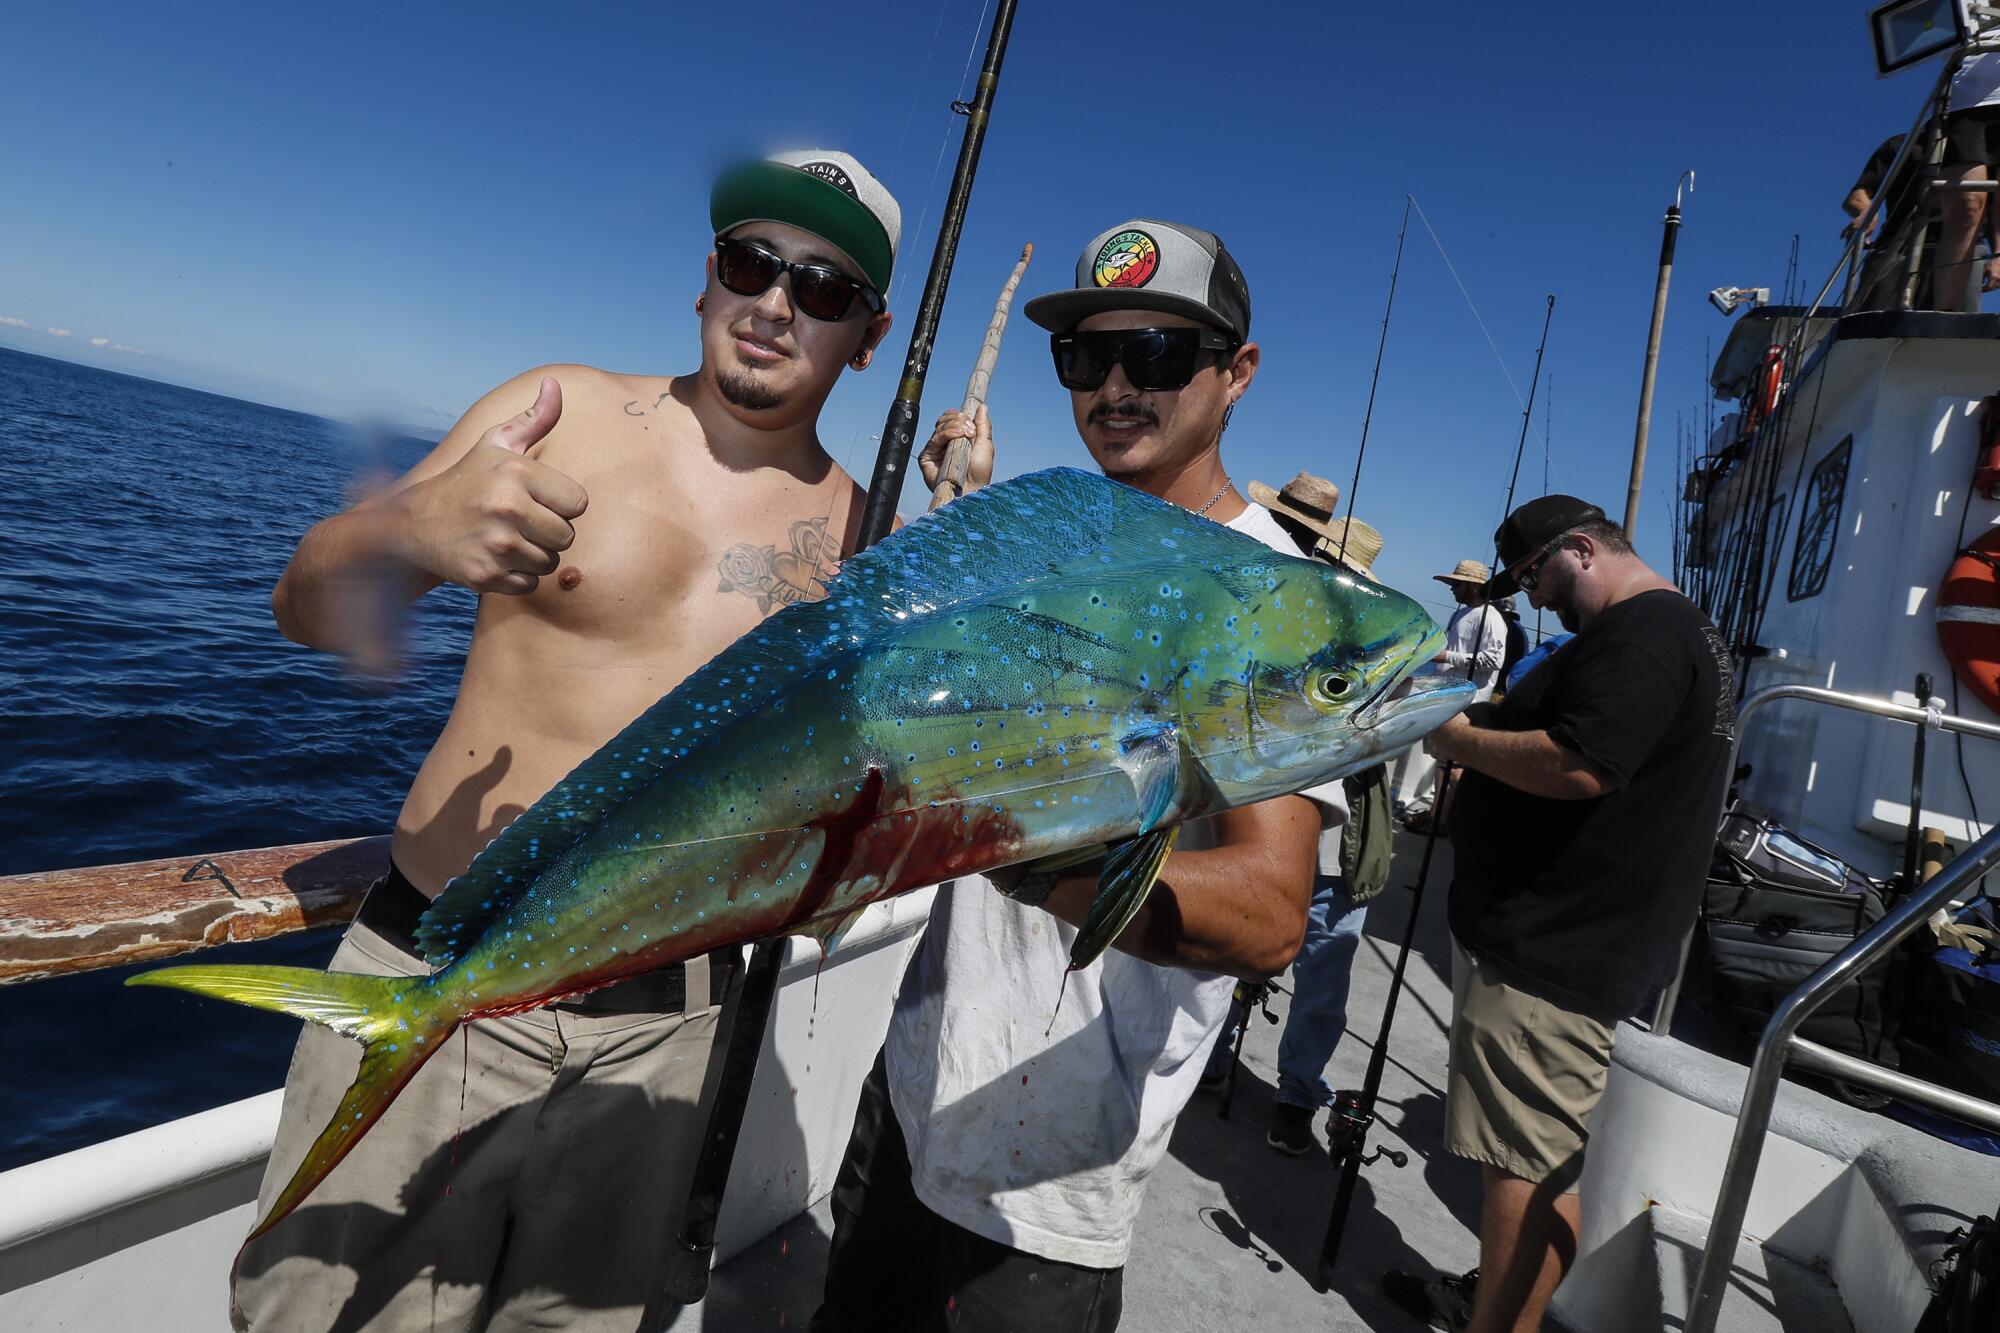 Angler may have landed record - The San Diego Union-Tribune